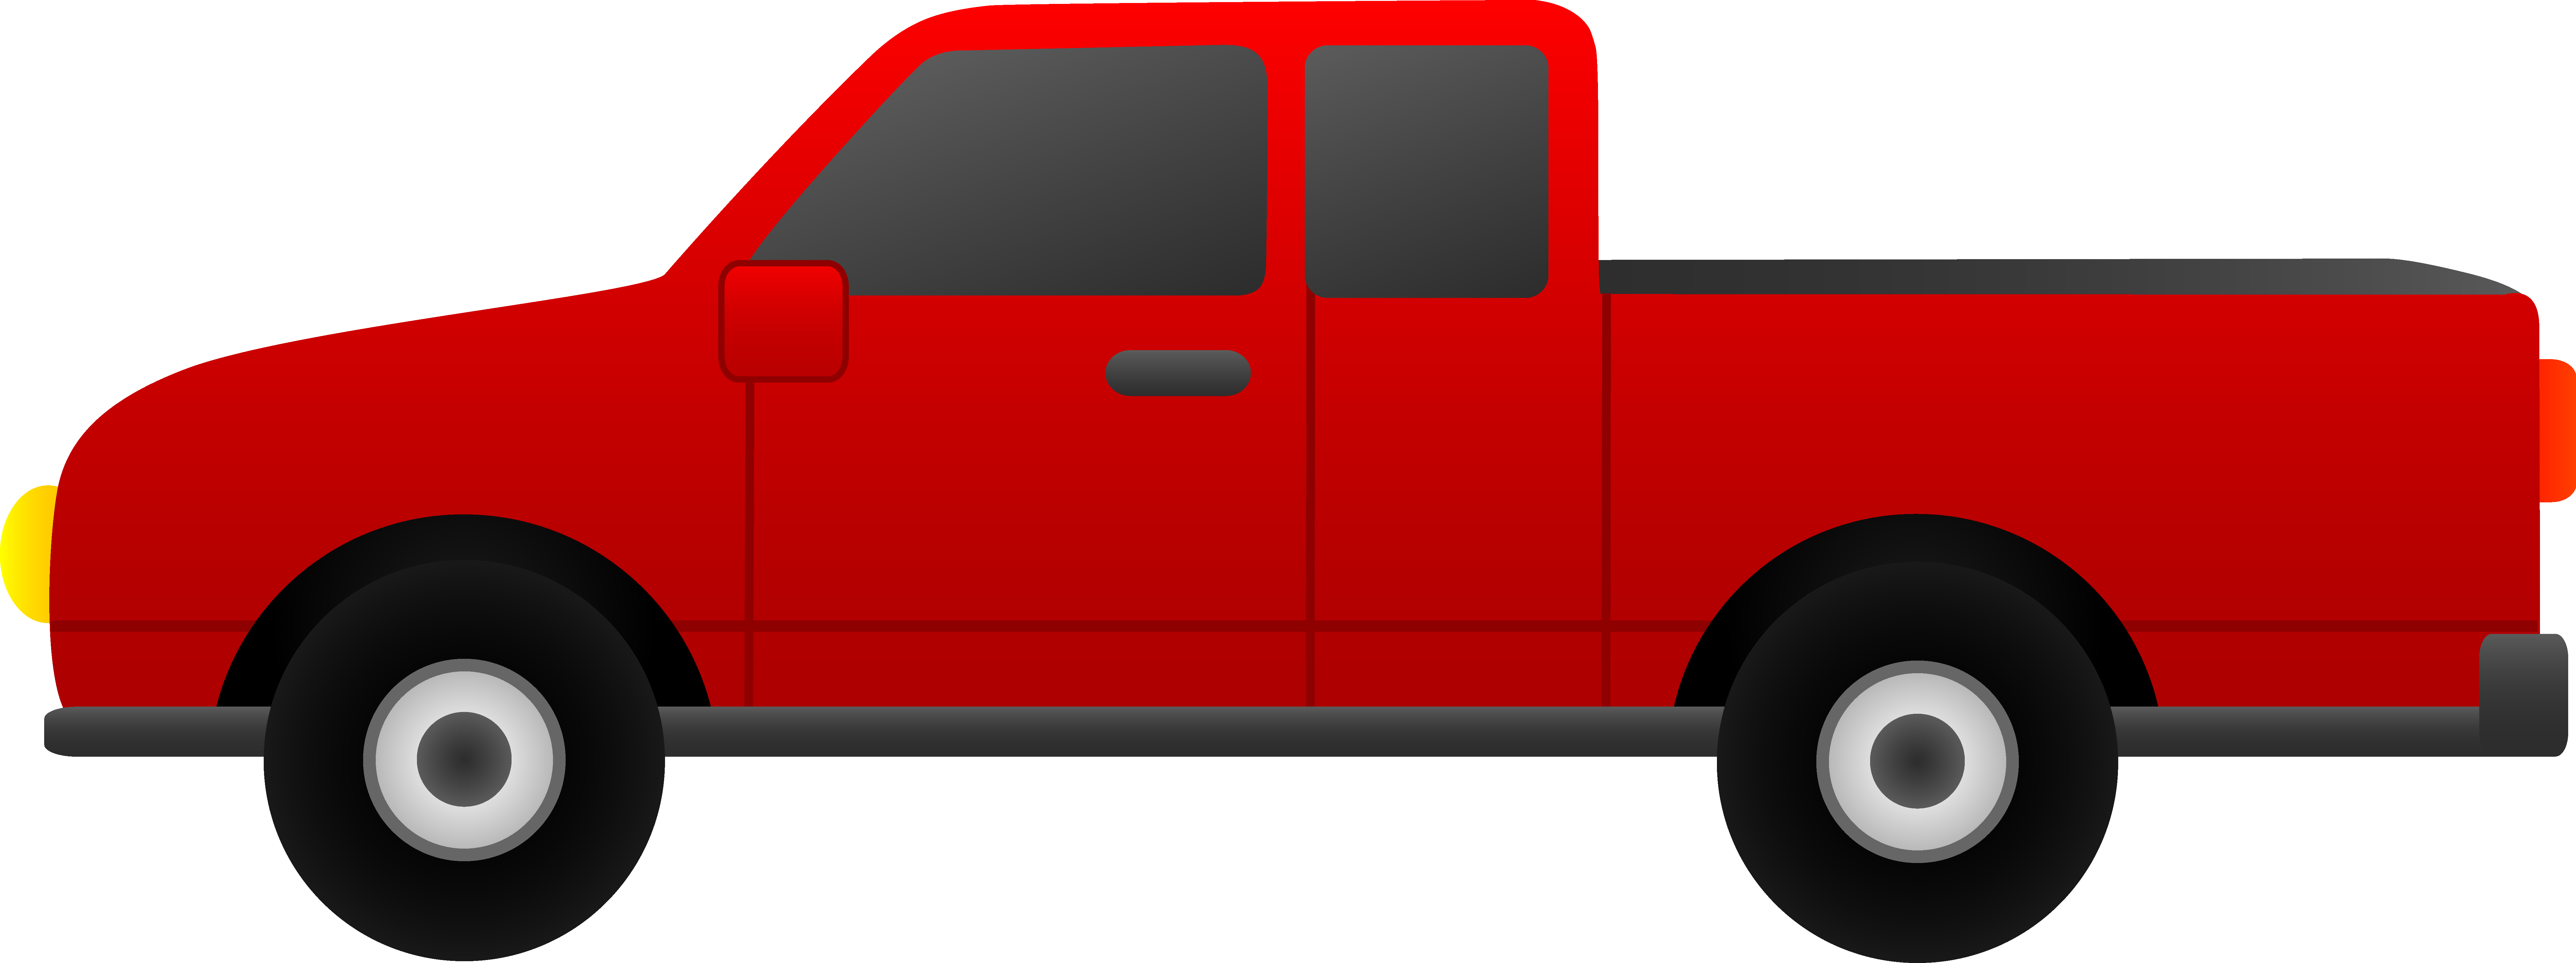 Pickup Truck Black And White Png Image Clipart